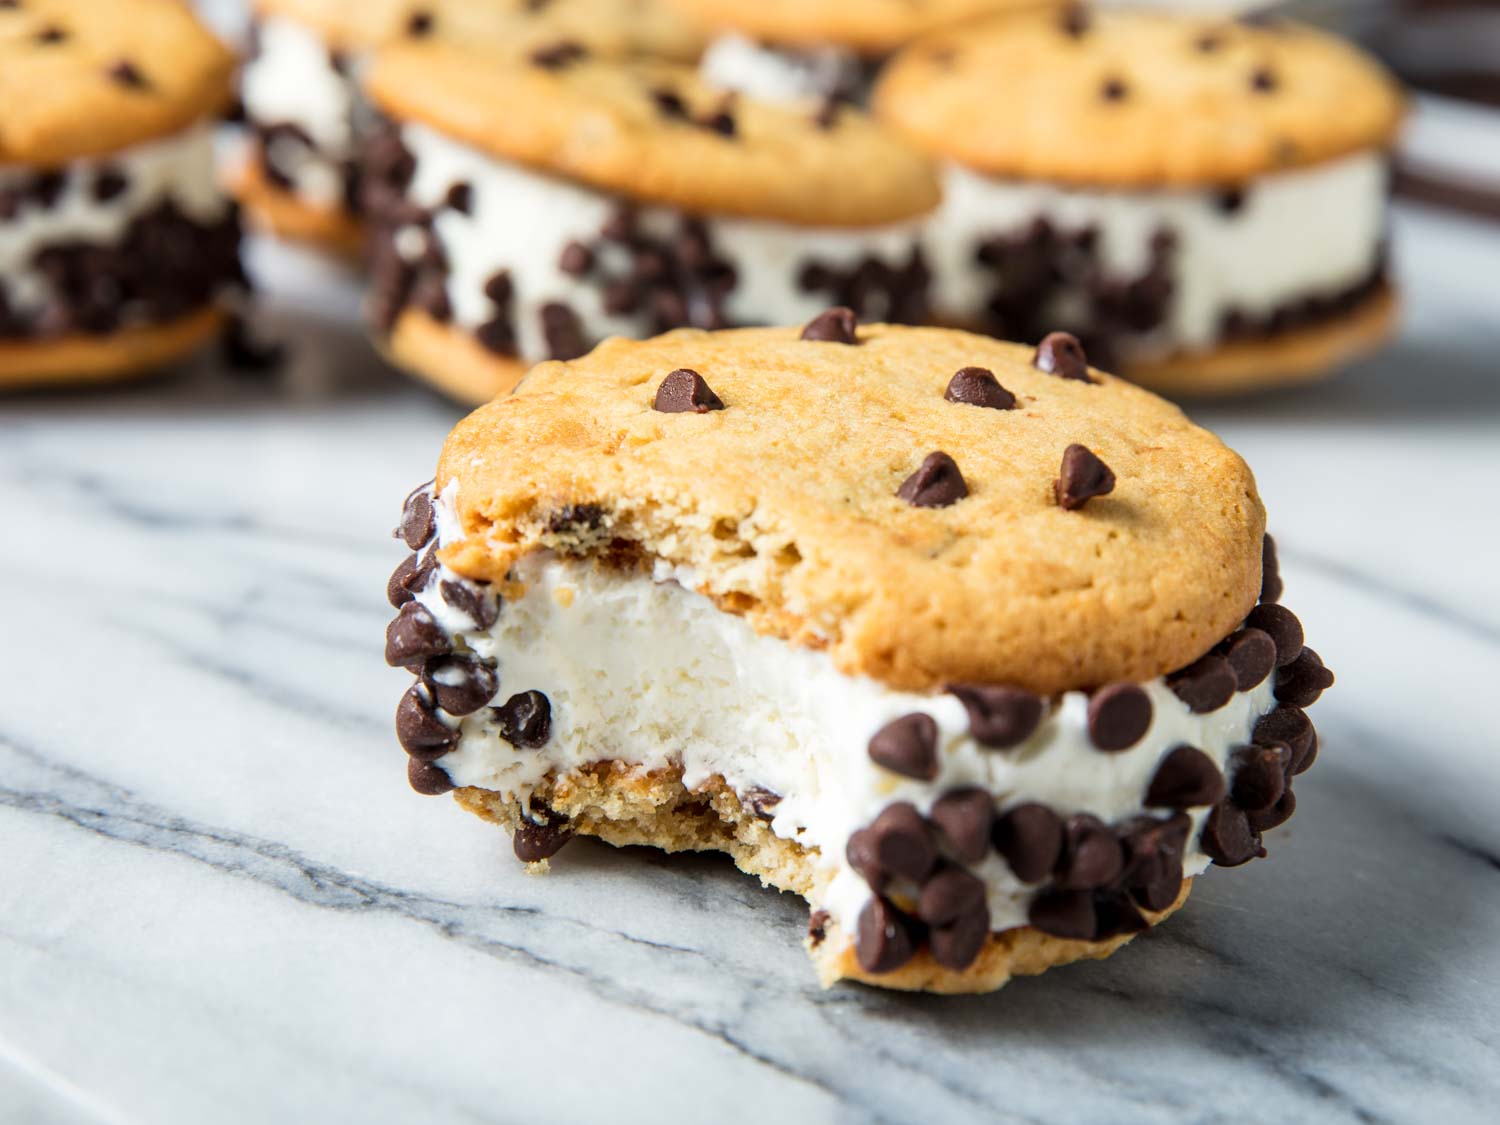 Nunbelievable Recipes: A Super-Sized Cookies ’N Cream Chipwich